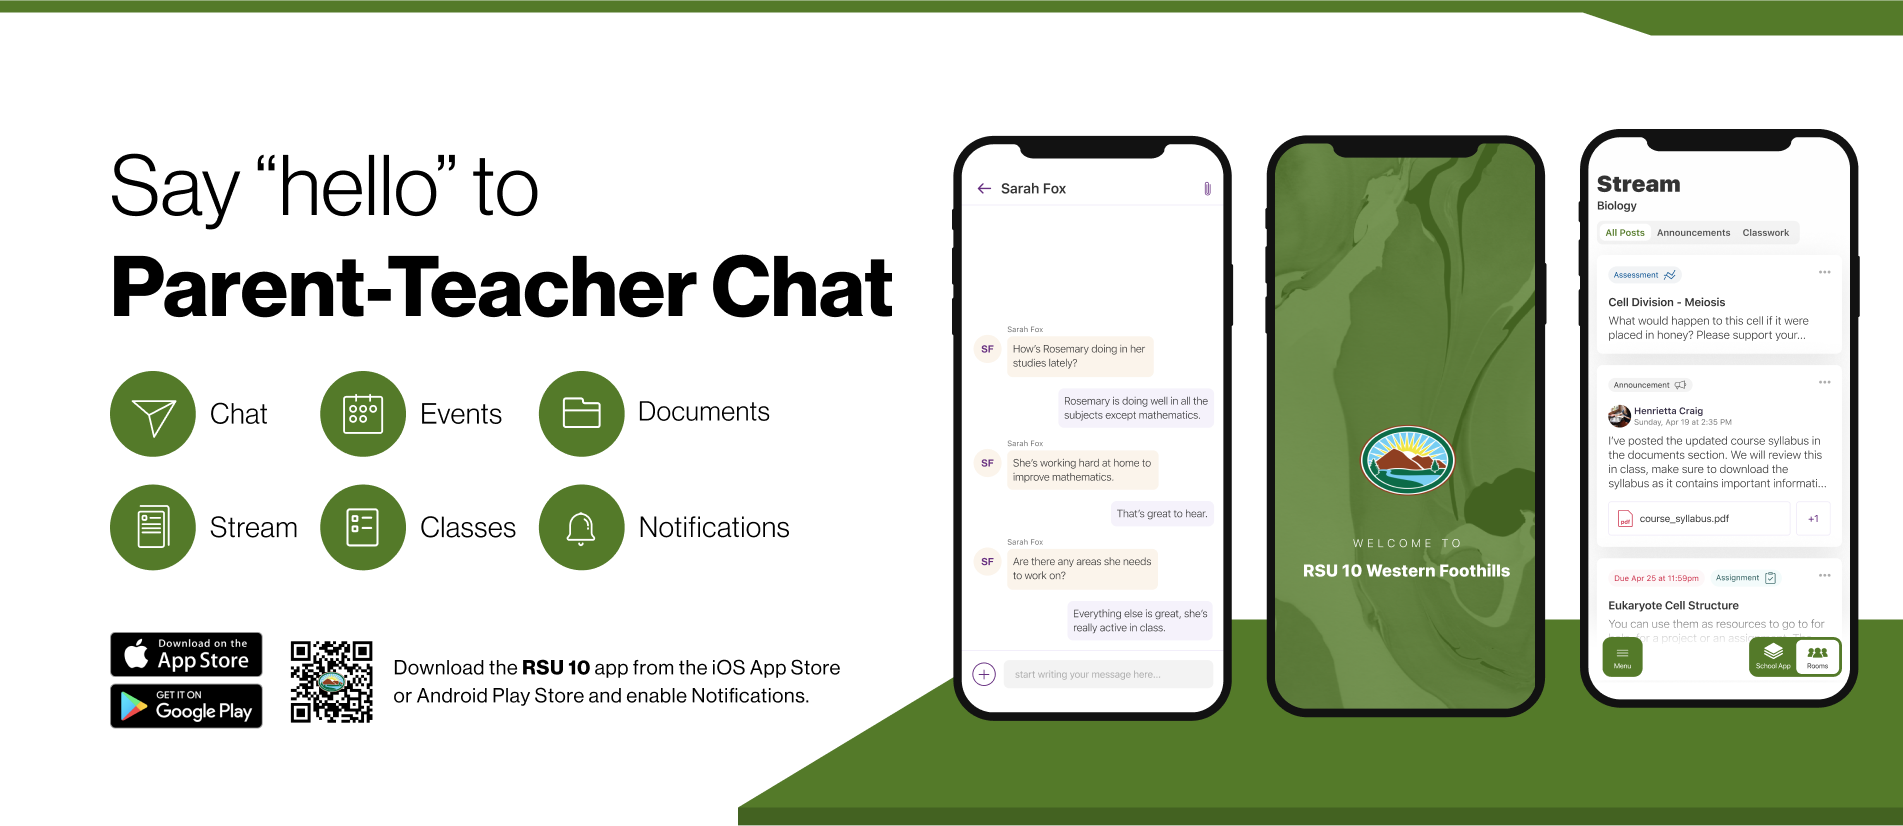 Say hello to Parent-Teacher chat in the new Rooms app. Download the RSU 10 app in the Google Play or Apple App store.